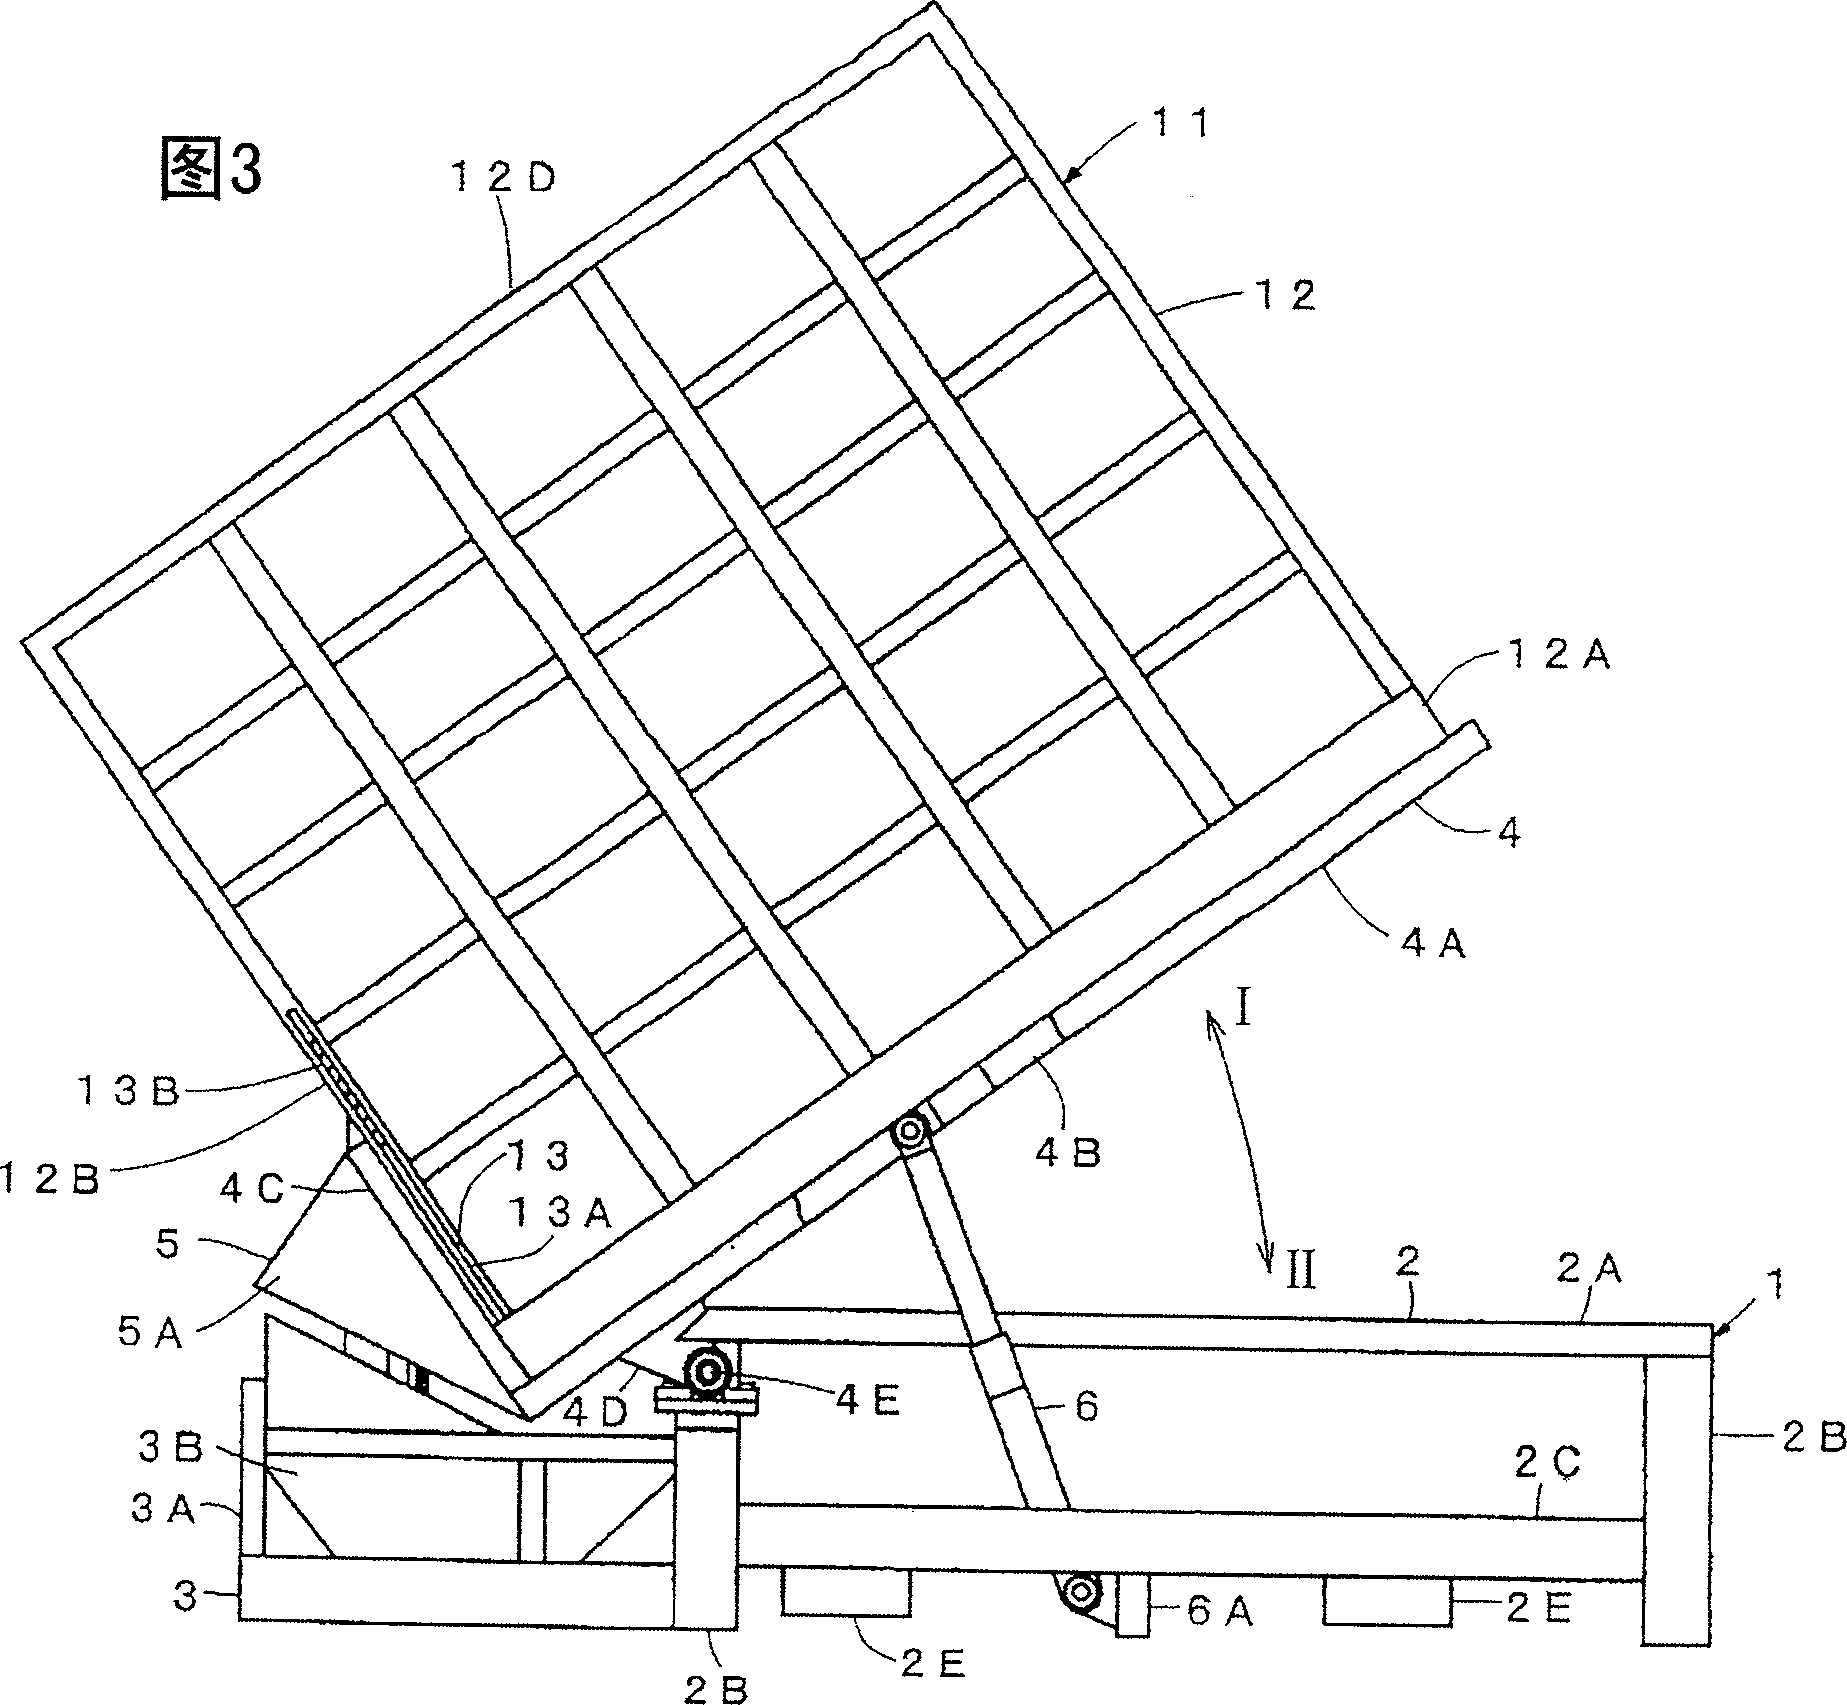 Container device for fertilizer dispatching